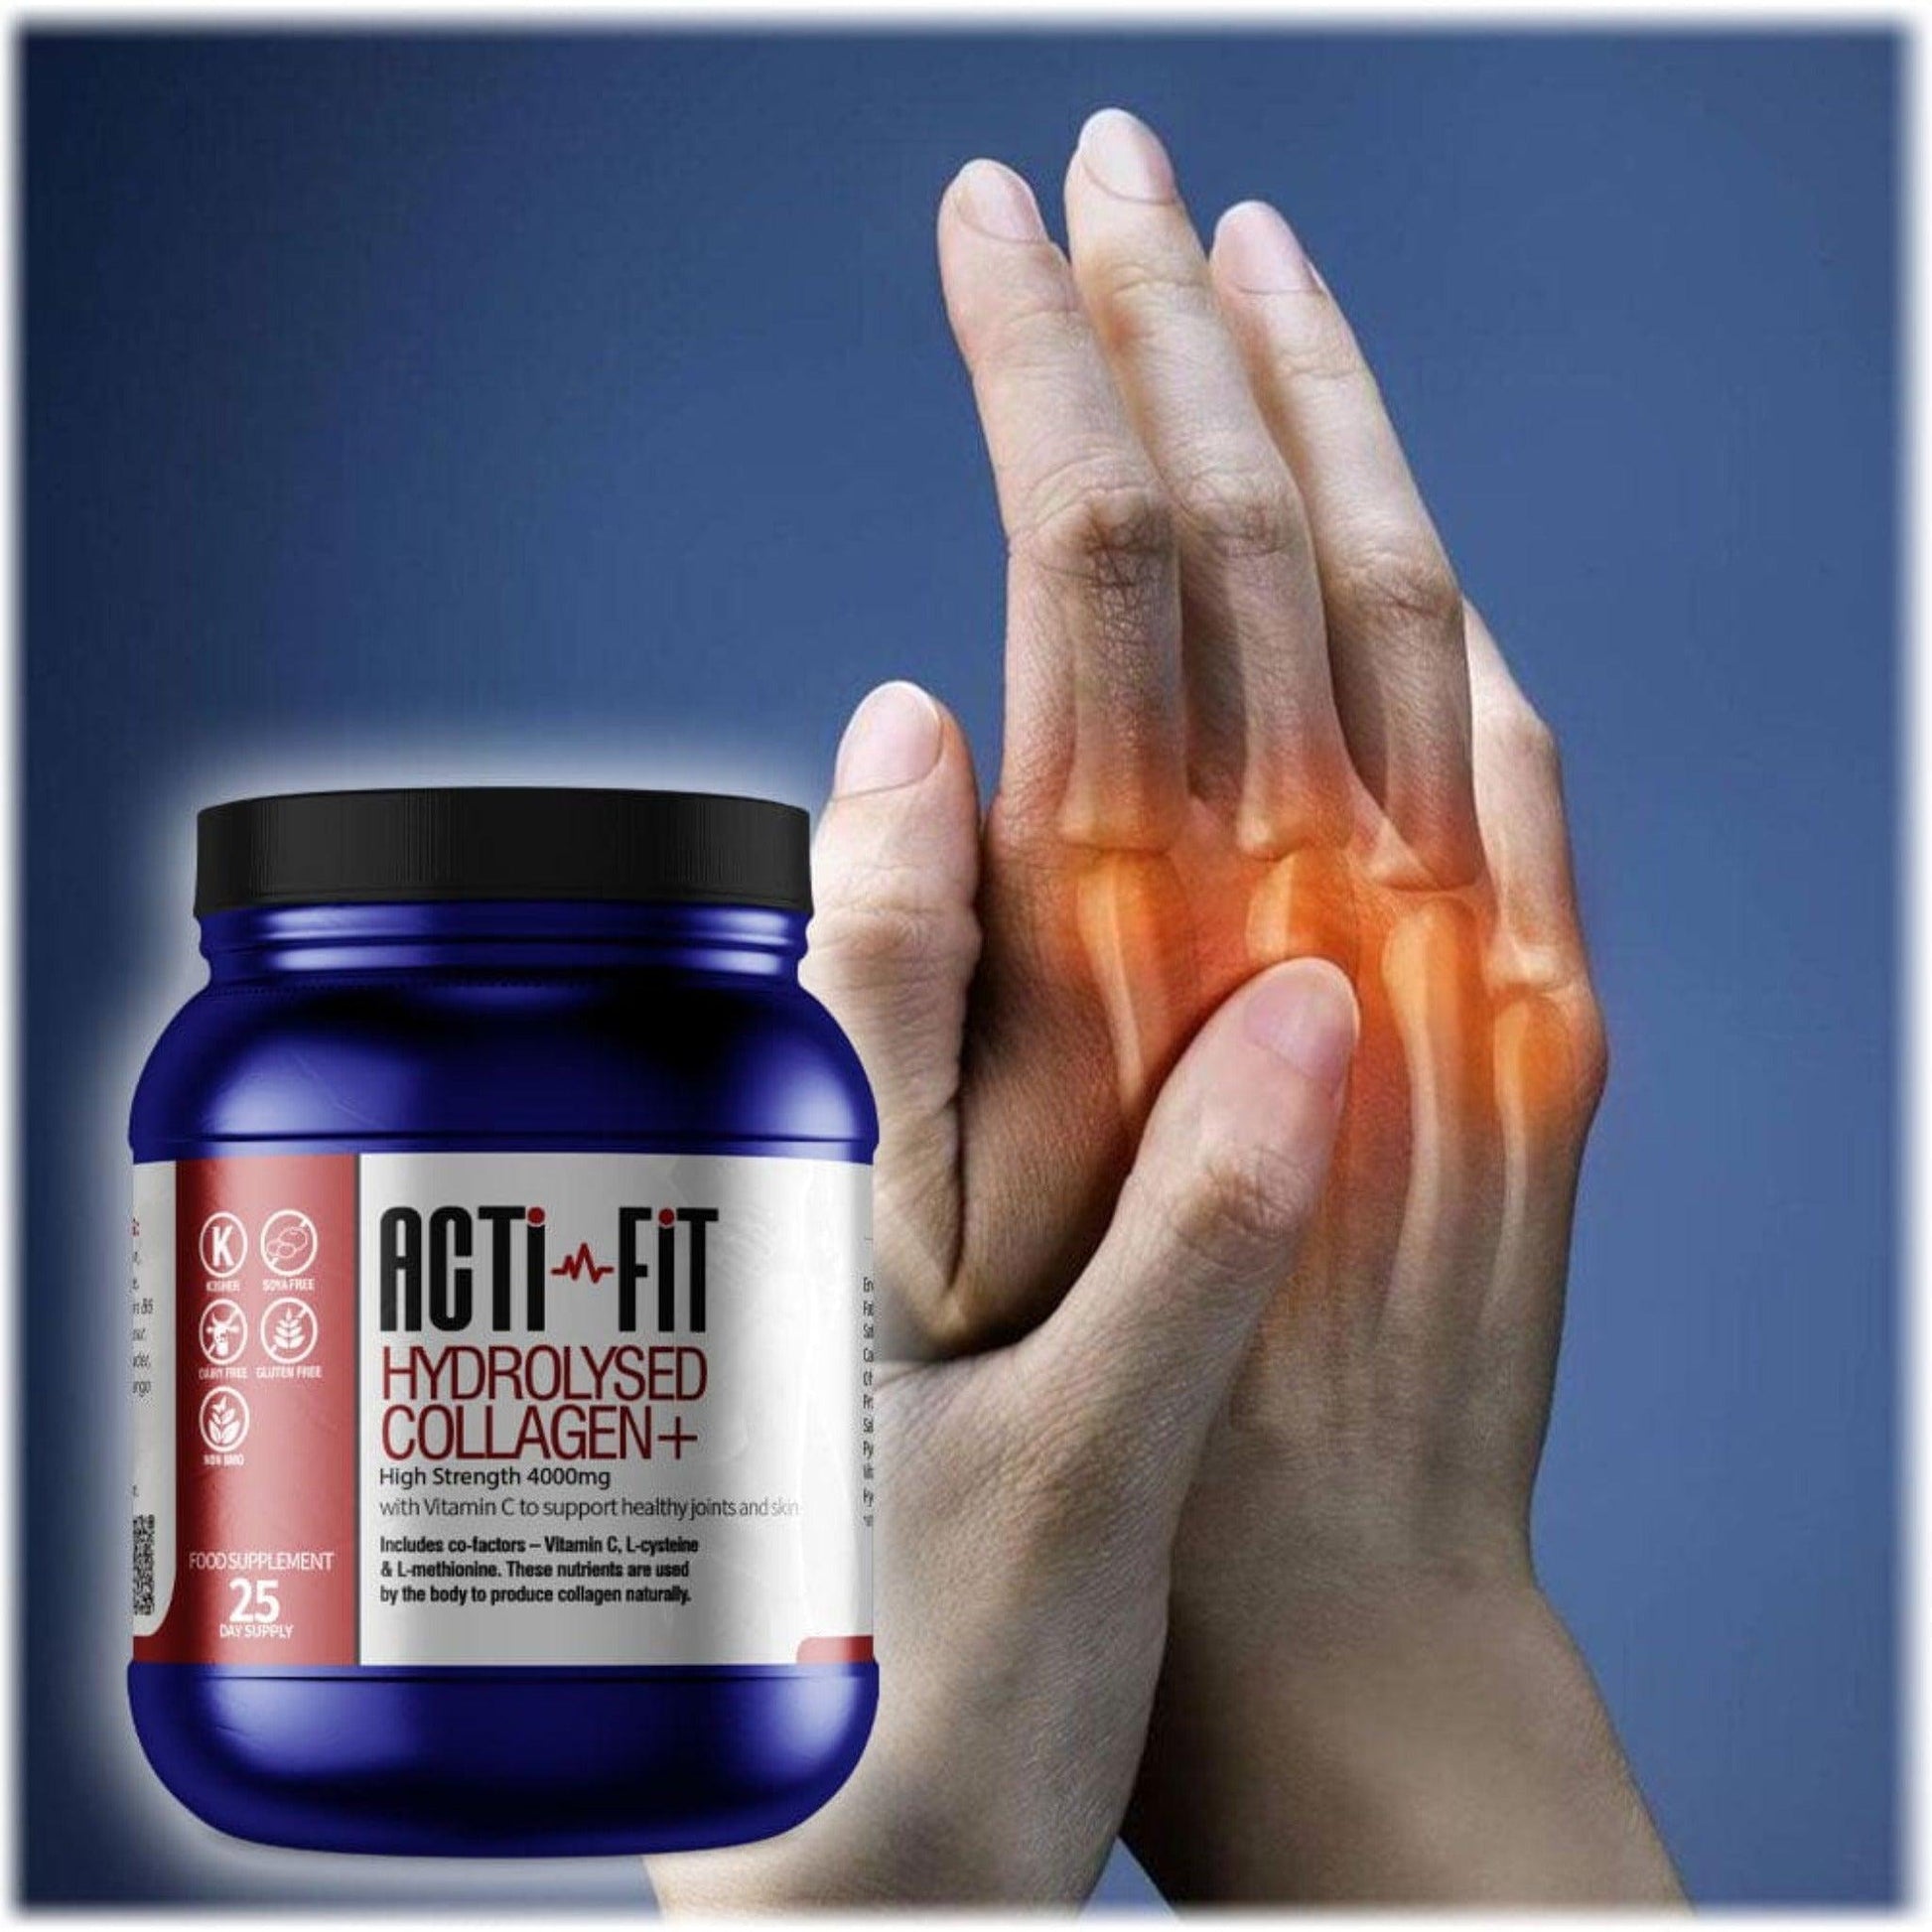 A woman holding the joints in her hand with a tub of Acti-Fit Hydrolysed Collagen 4000mg High Strength in the foreground